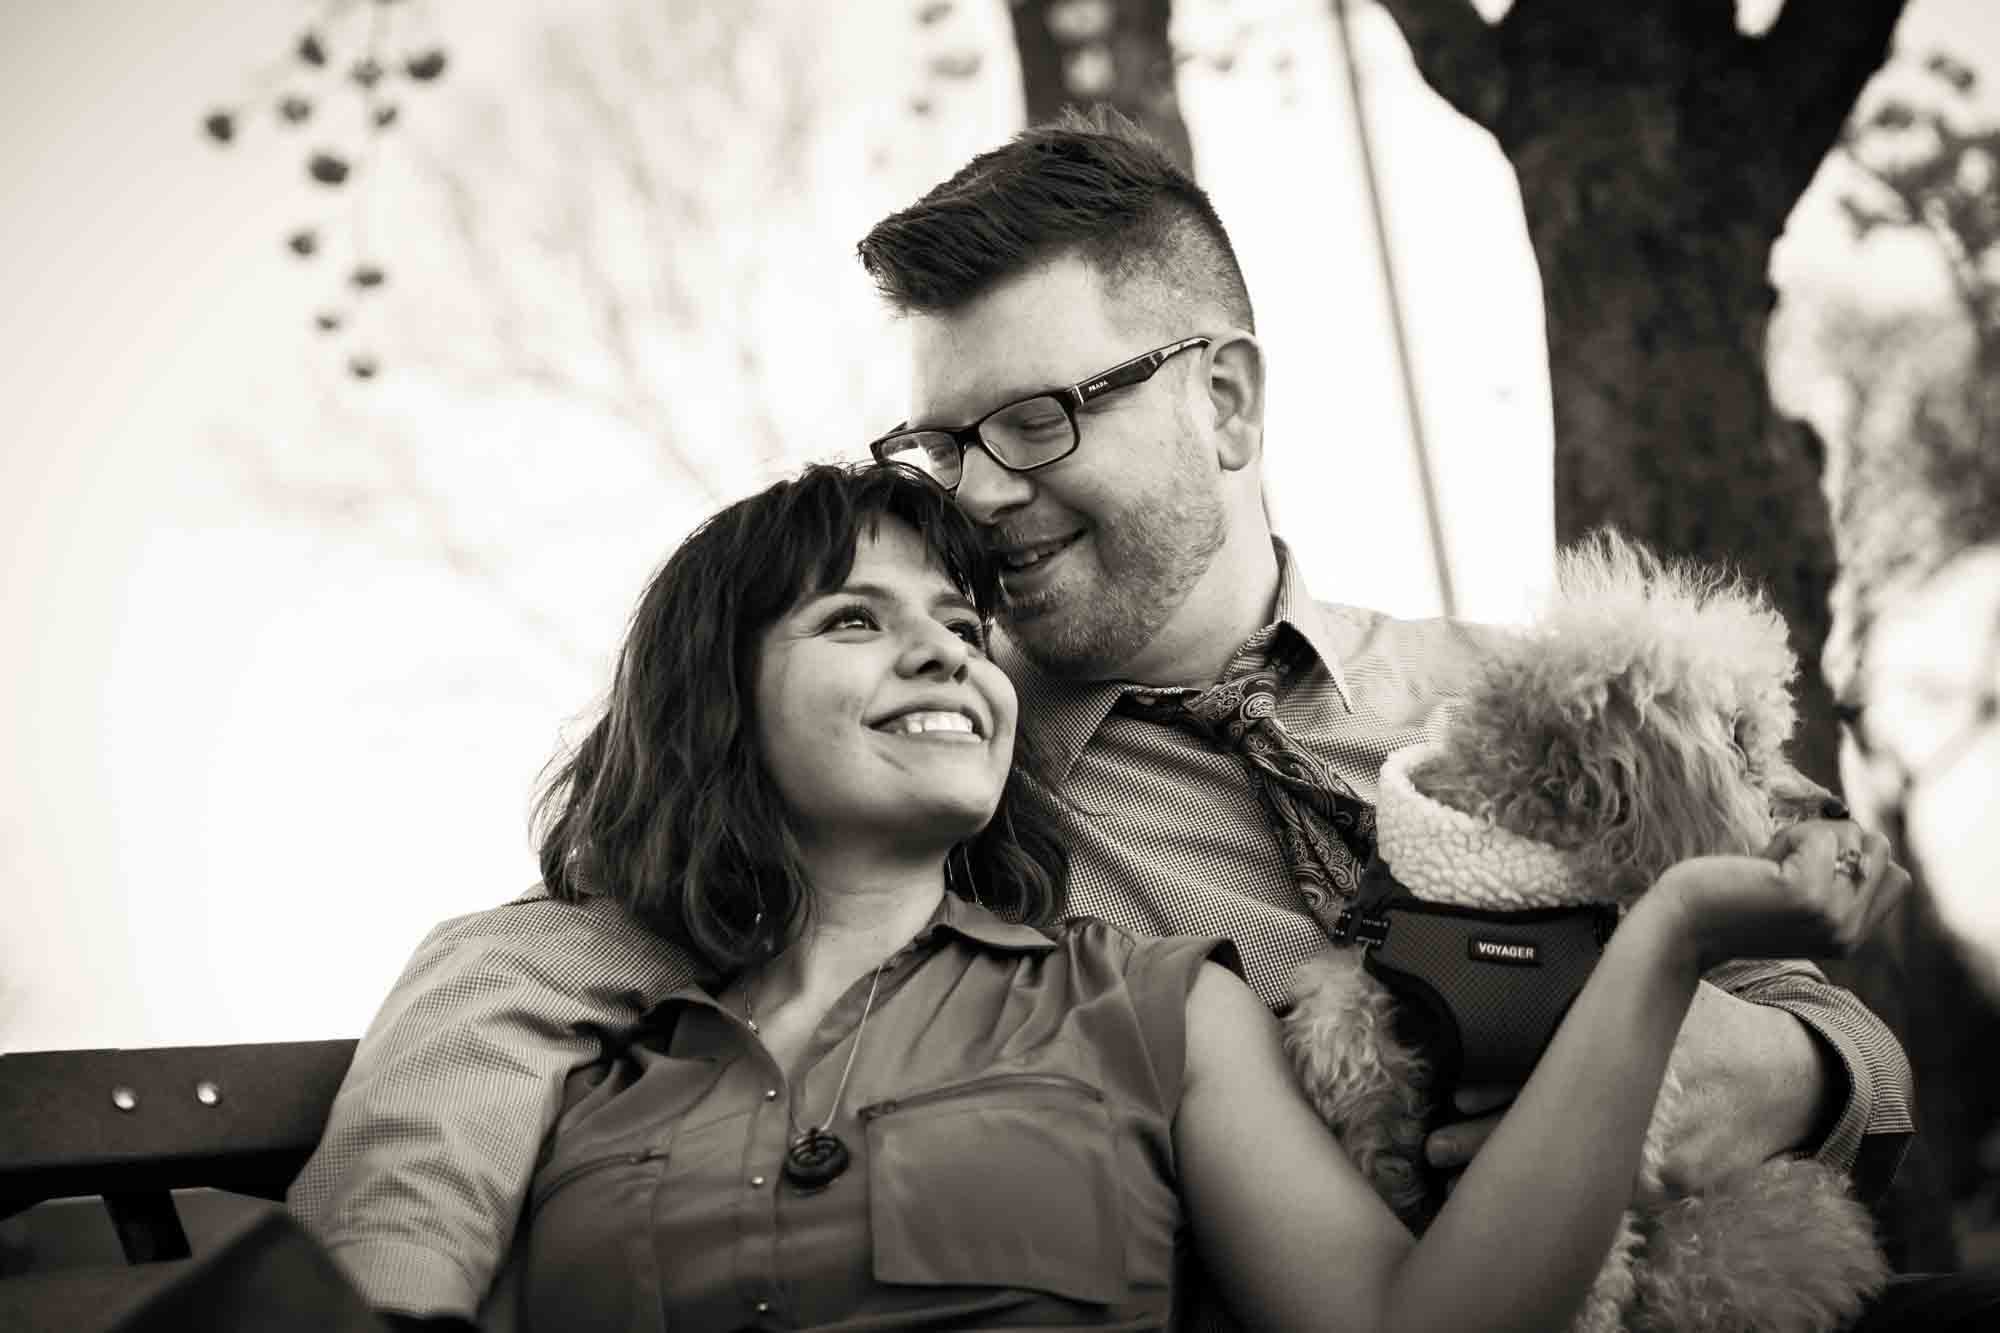 Portrait of engaged couple on park bench for article on cherry blossom photo tips